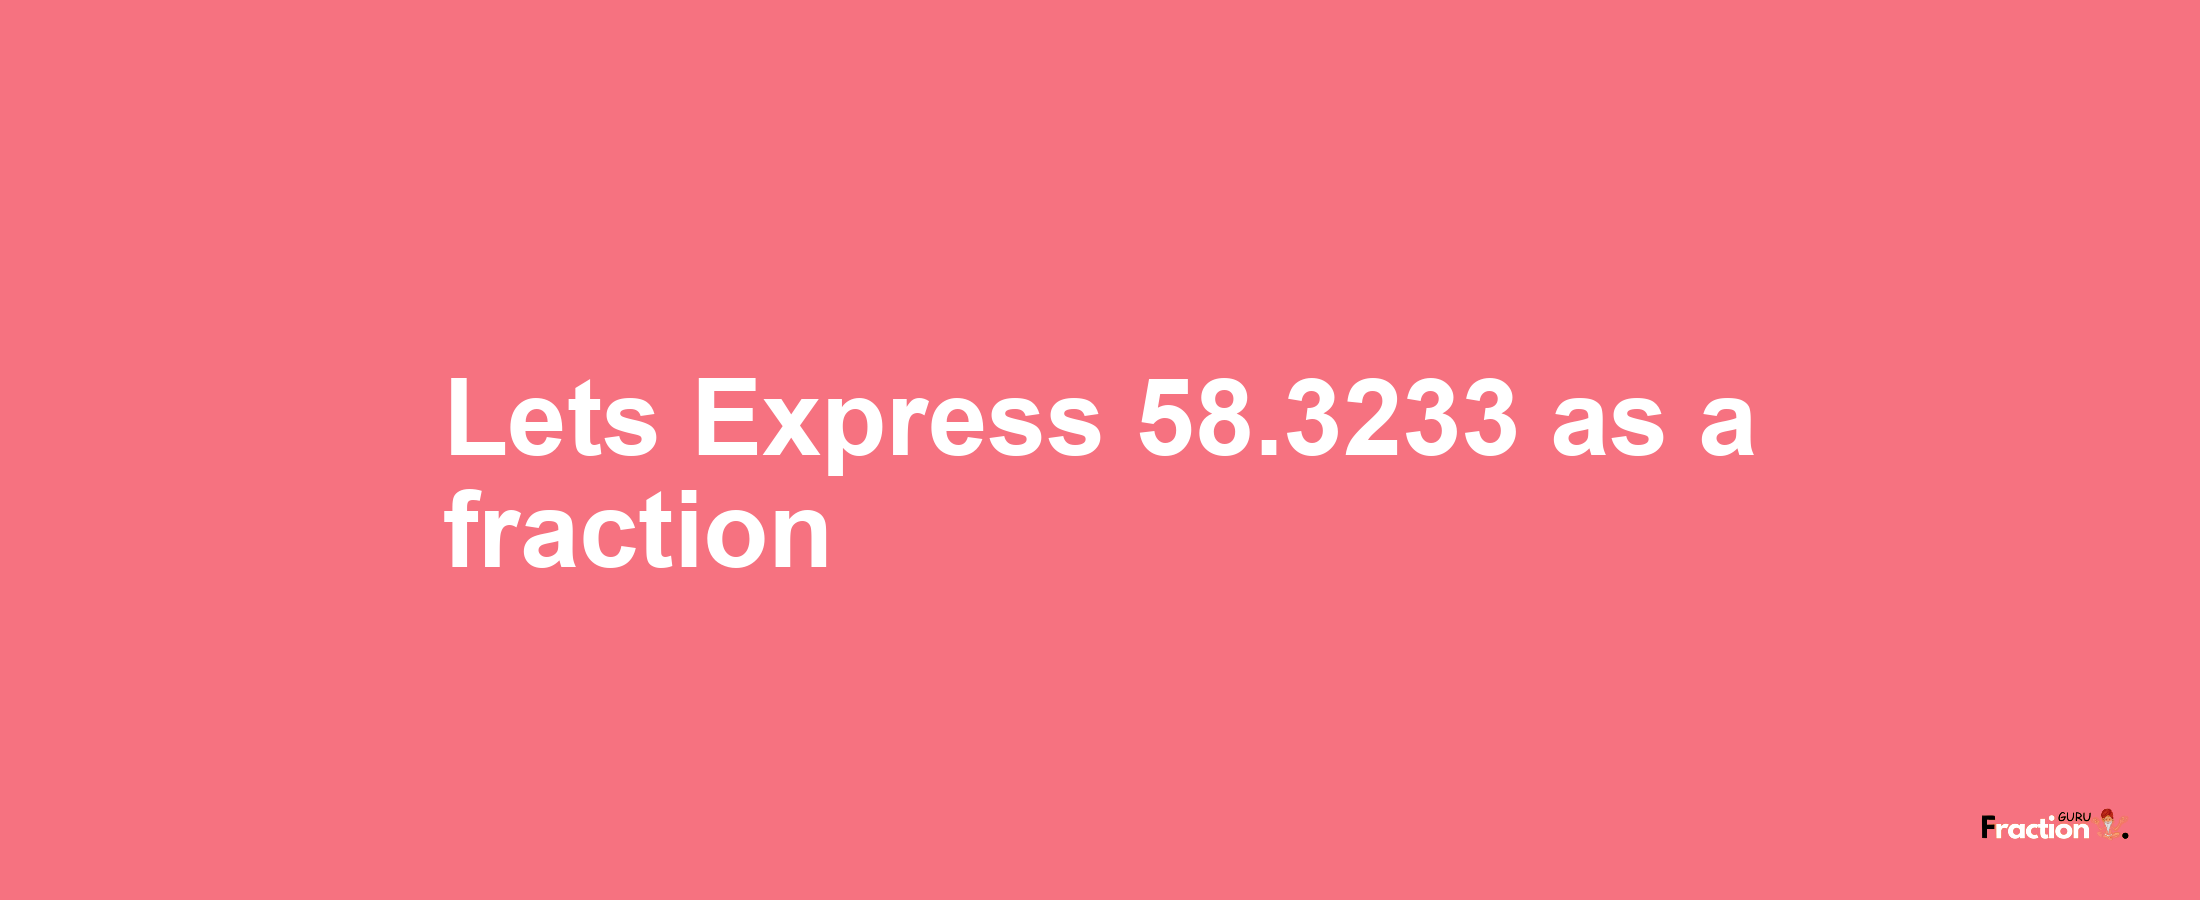 Lets Express 58.3233 as afraction